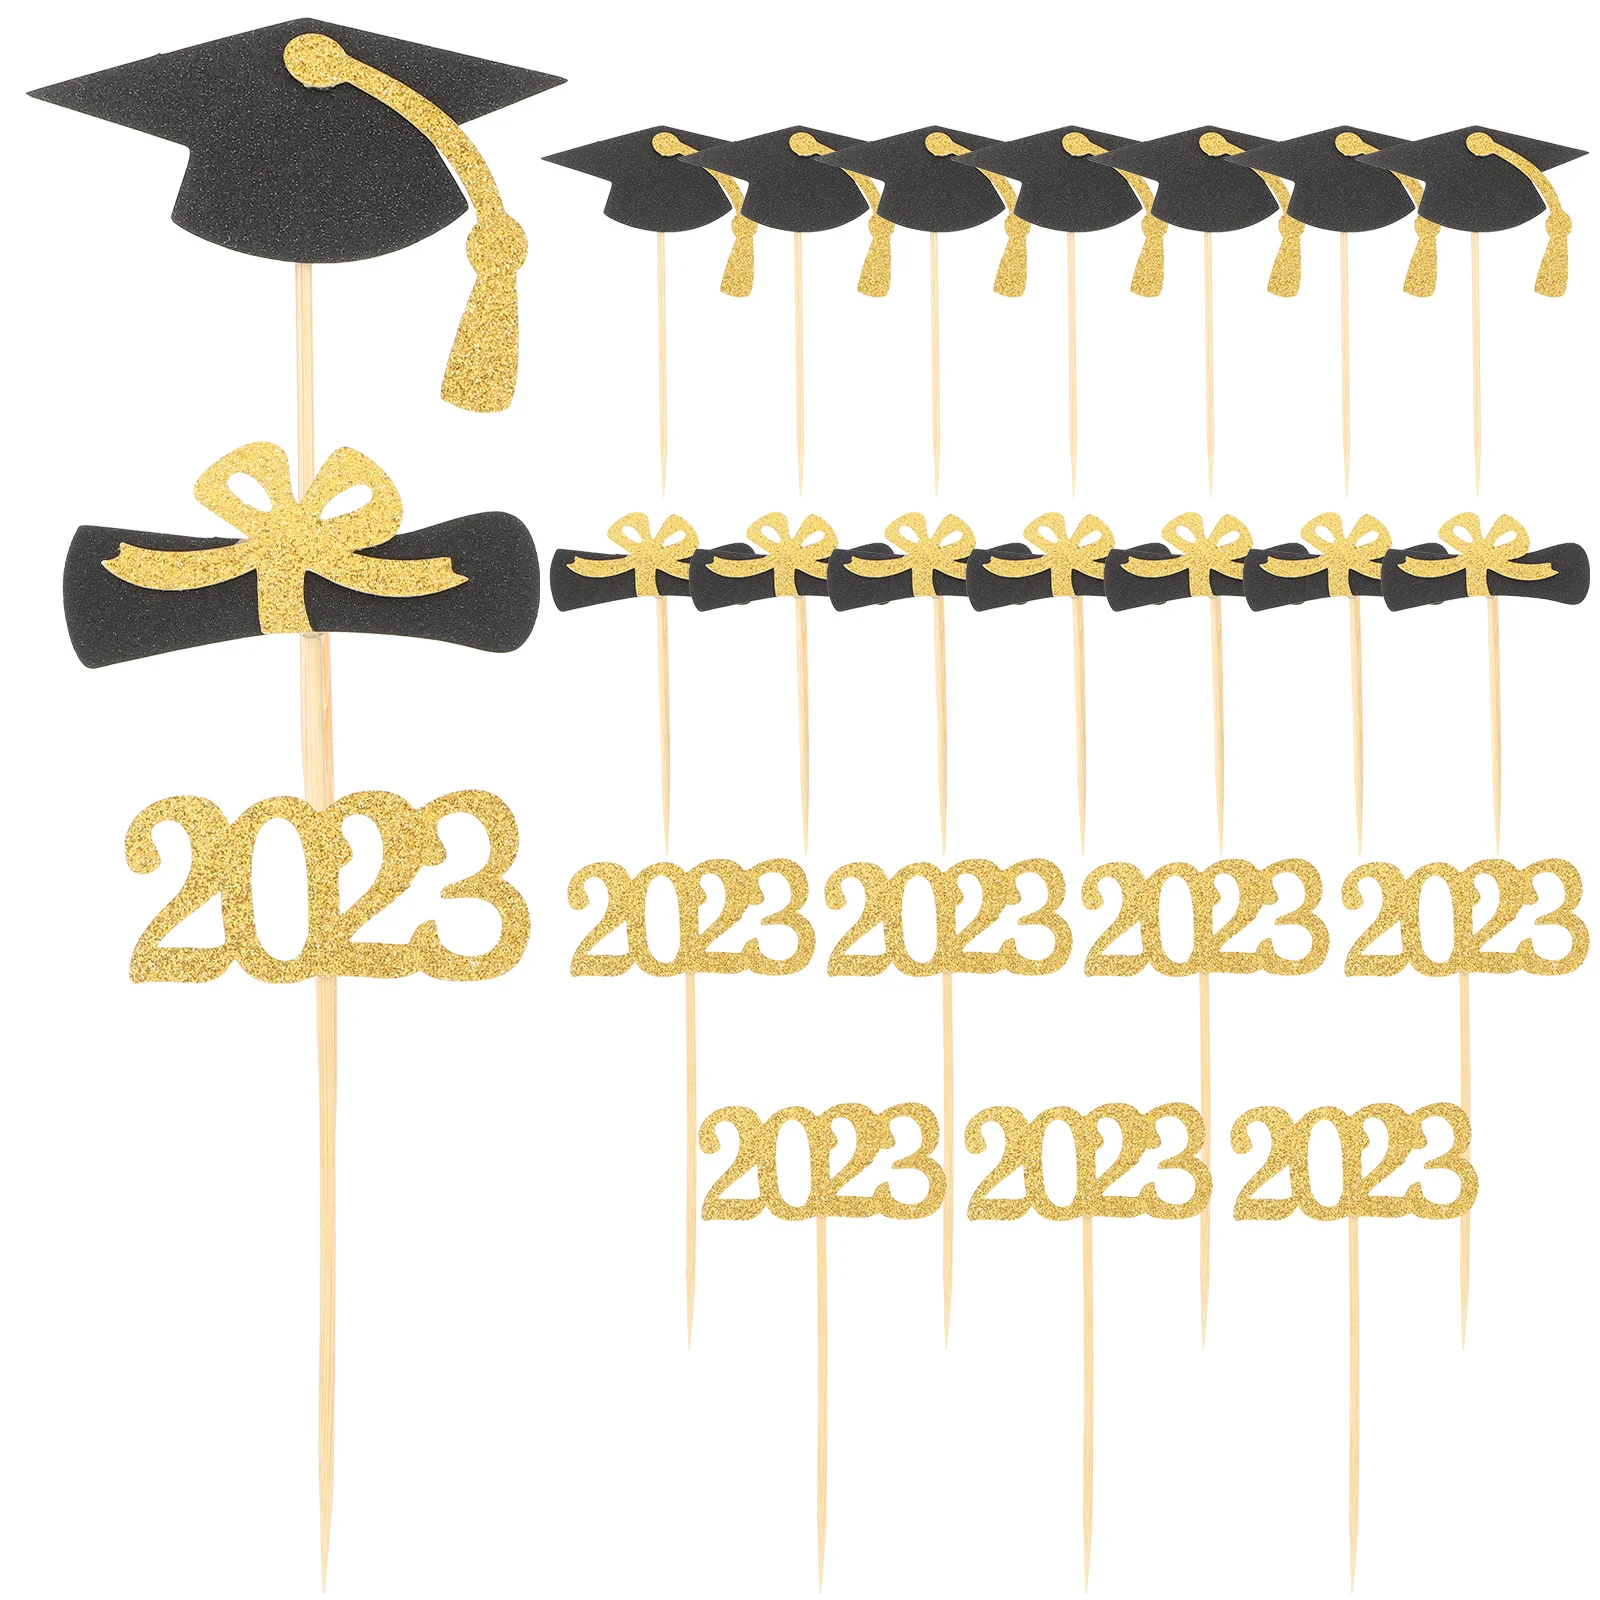 

24 Pcs 2023 Graduation Card Insertion Black Cake Paper Cake Decors Caps Topper Cupcake Toppers Wood Decorations